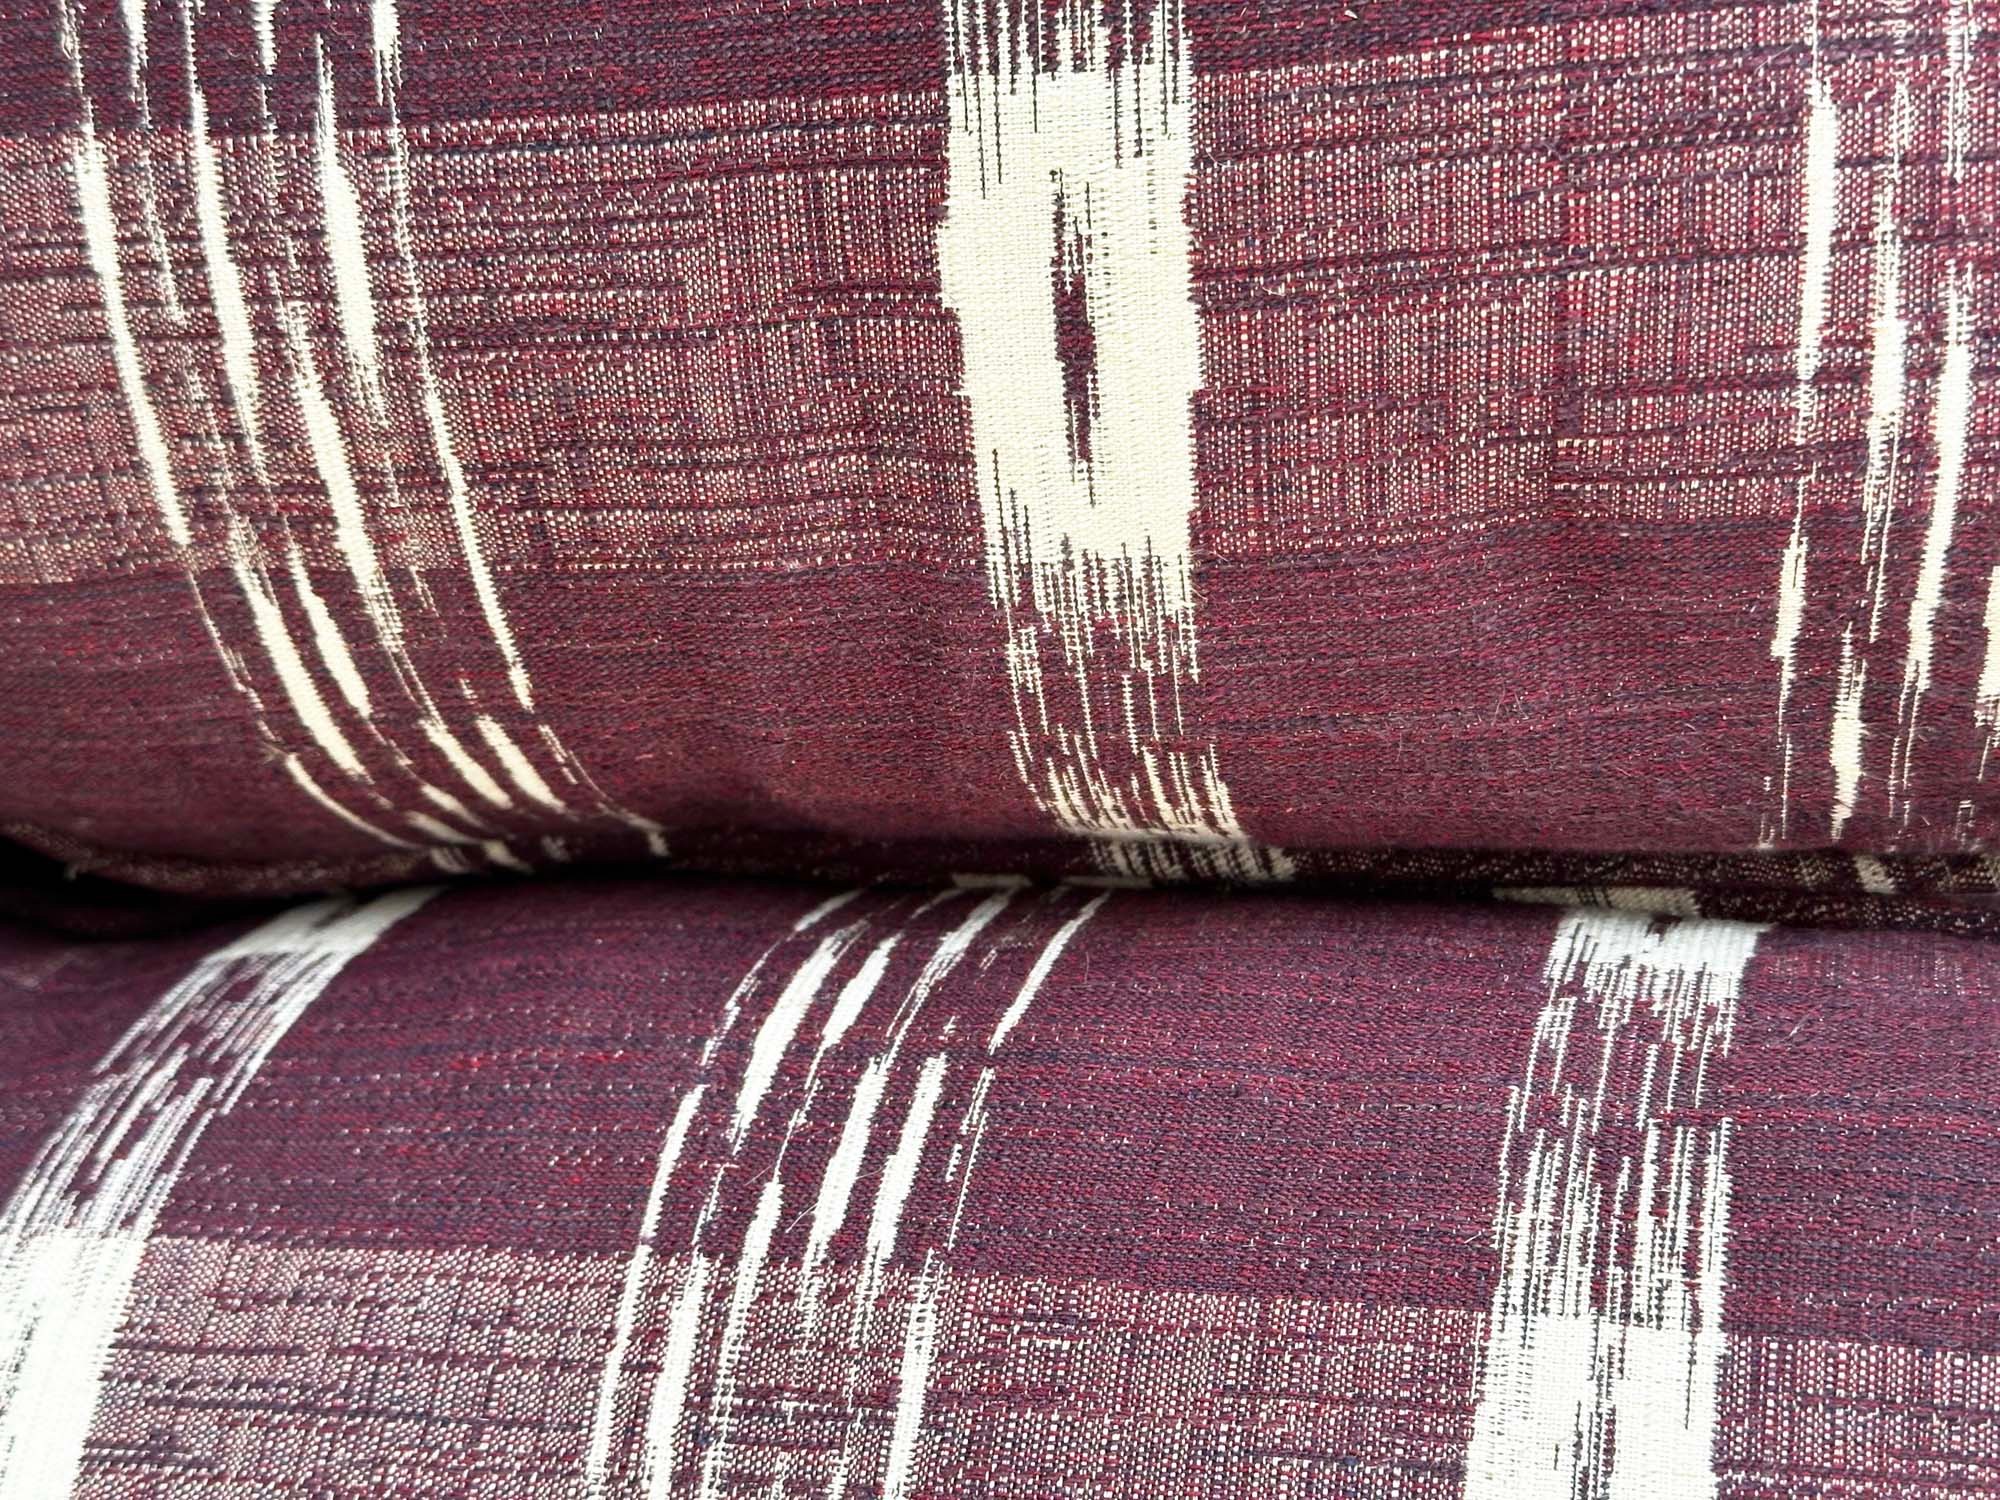 SOFA, Swedish check purple/white upholstery with scroll arms, 203cm W. - Image 8 of 18